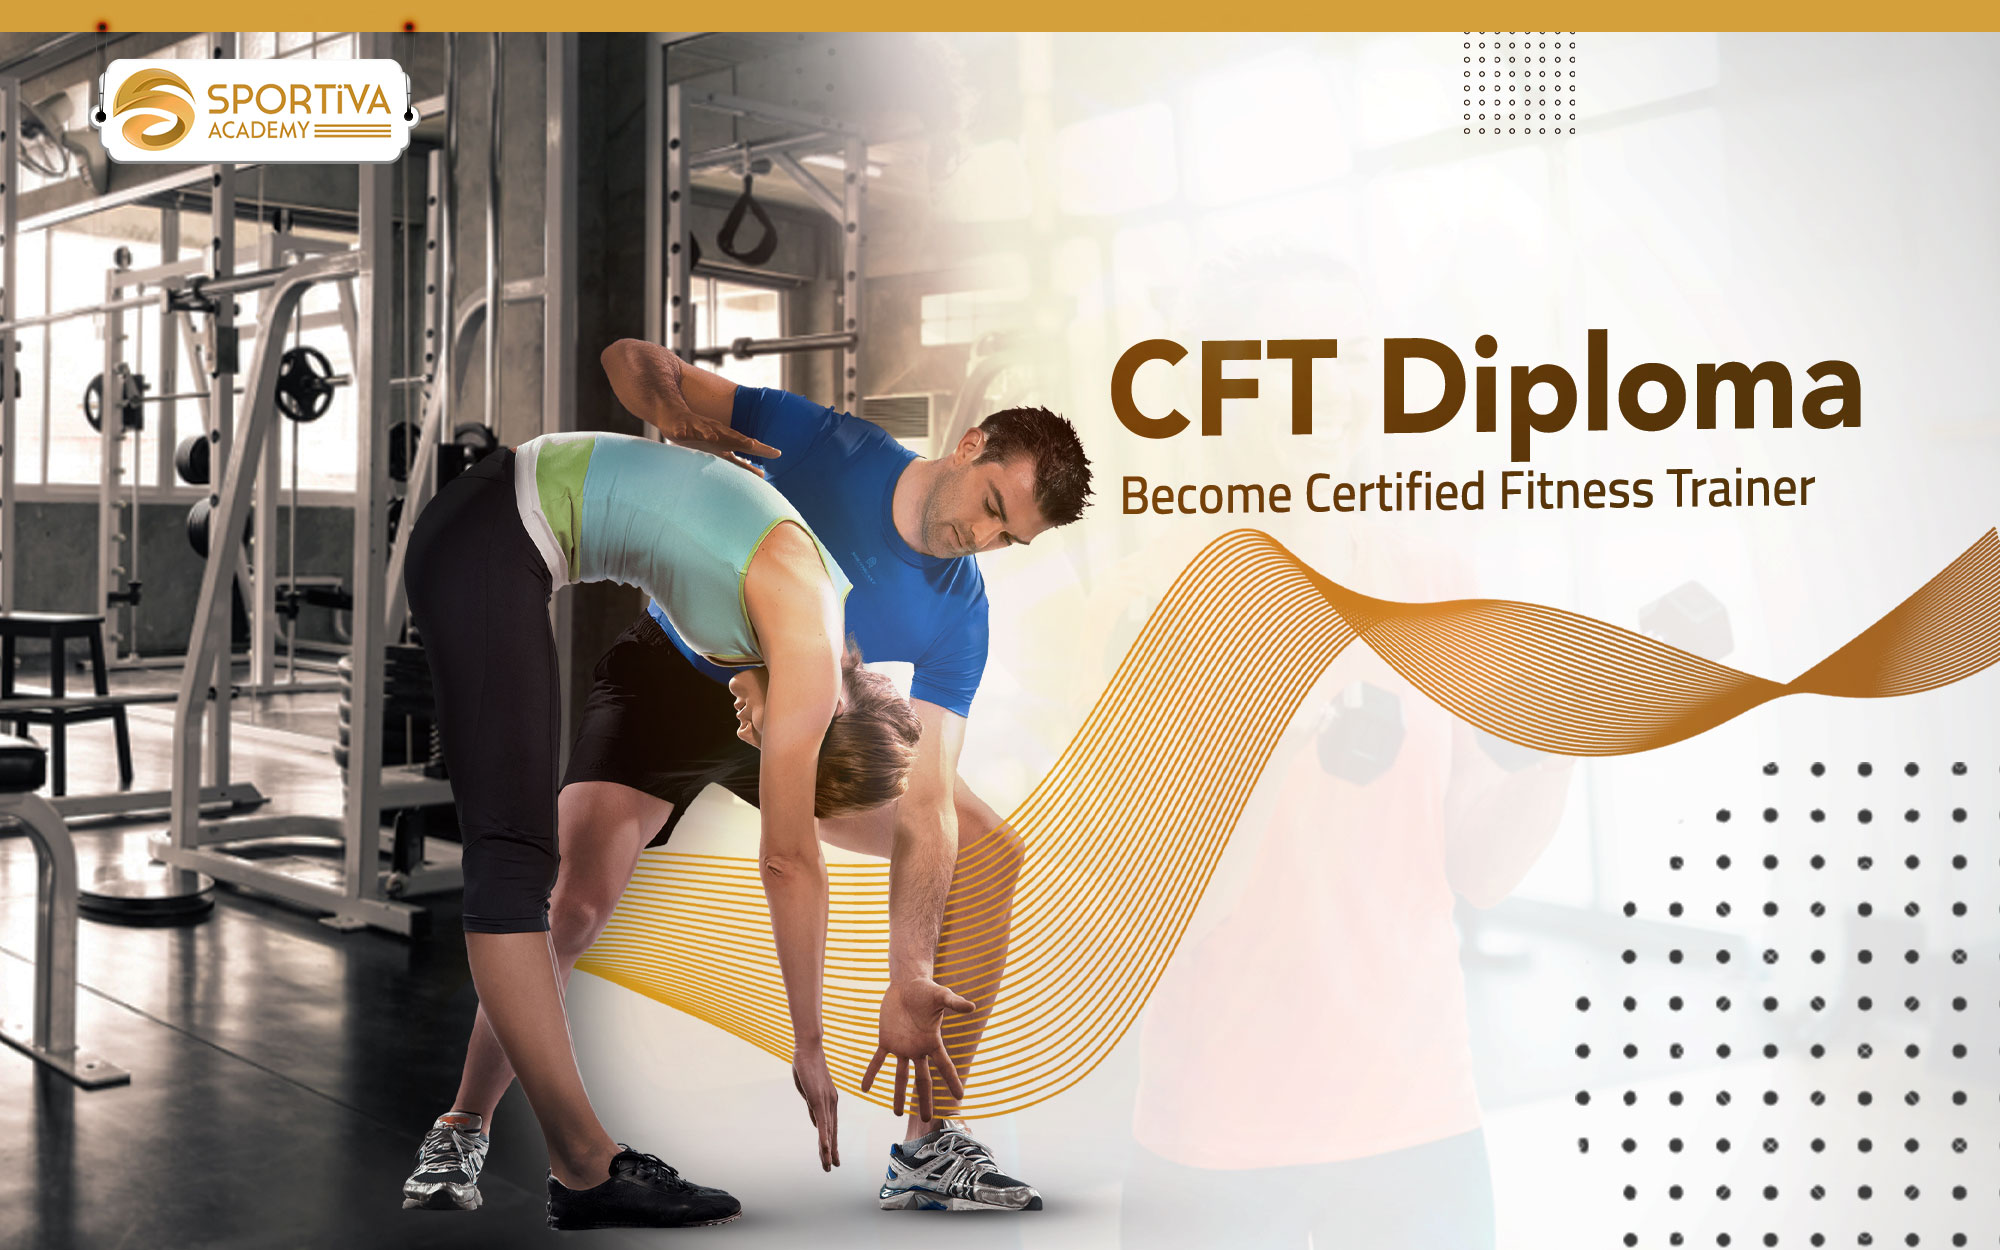 Personal trainer and fitness trainer diploma - Alexandria